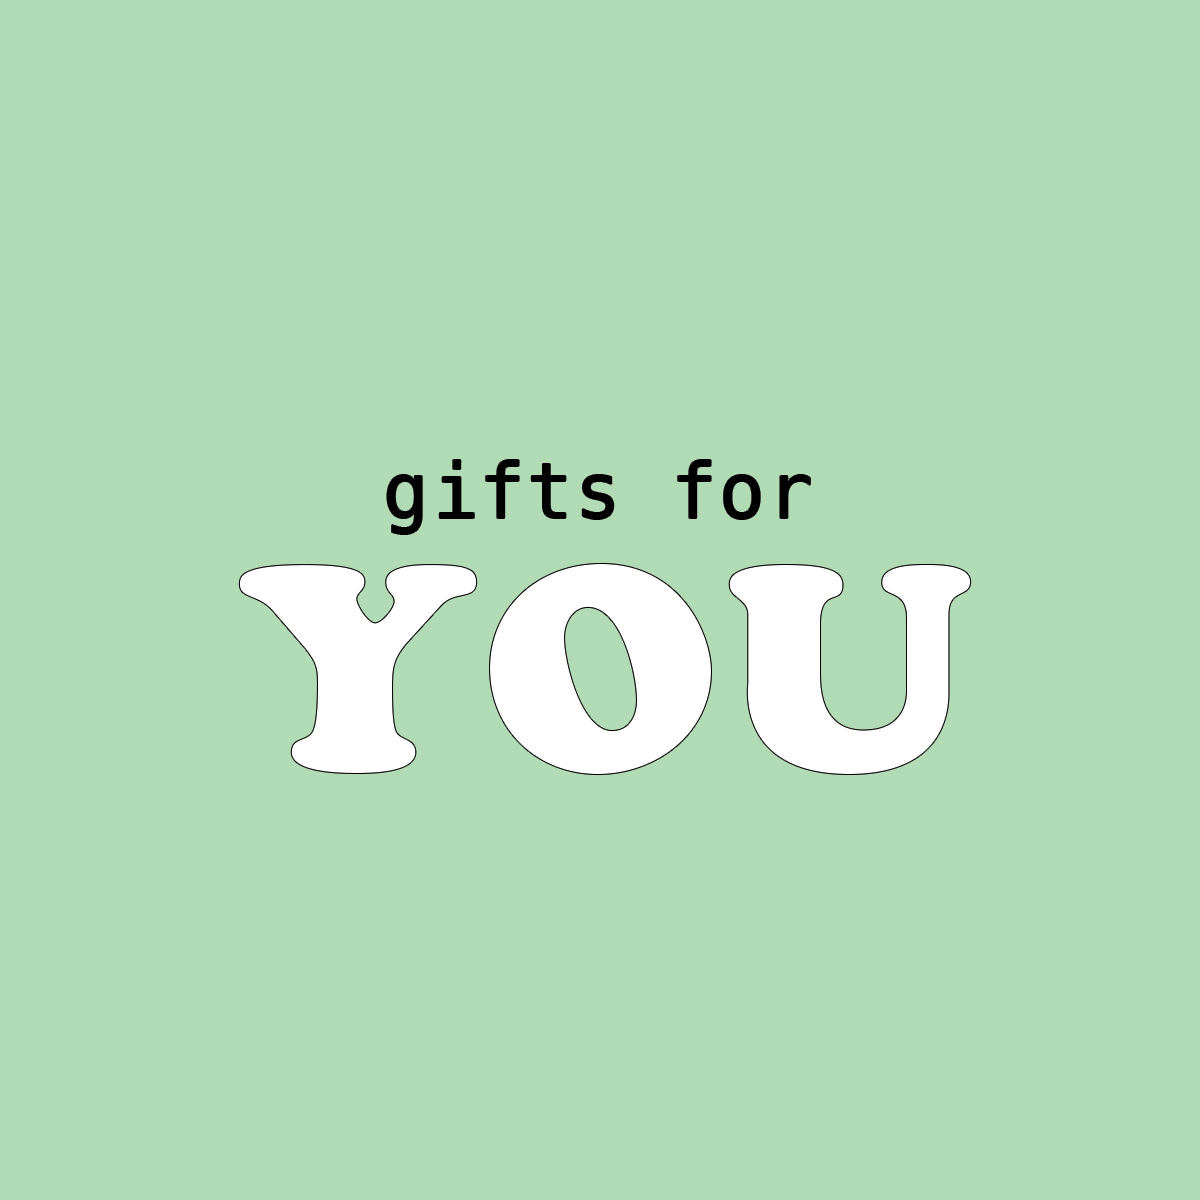 Gifts for You